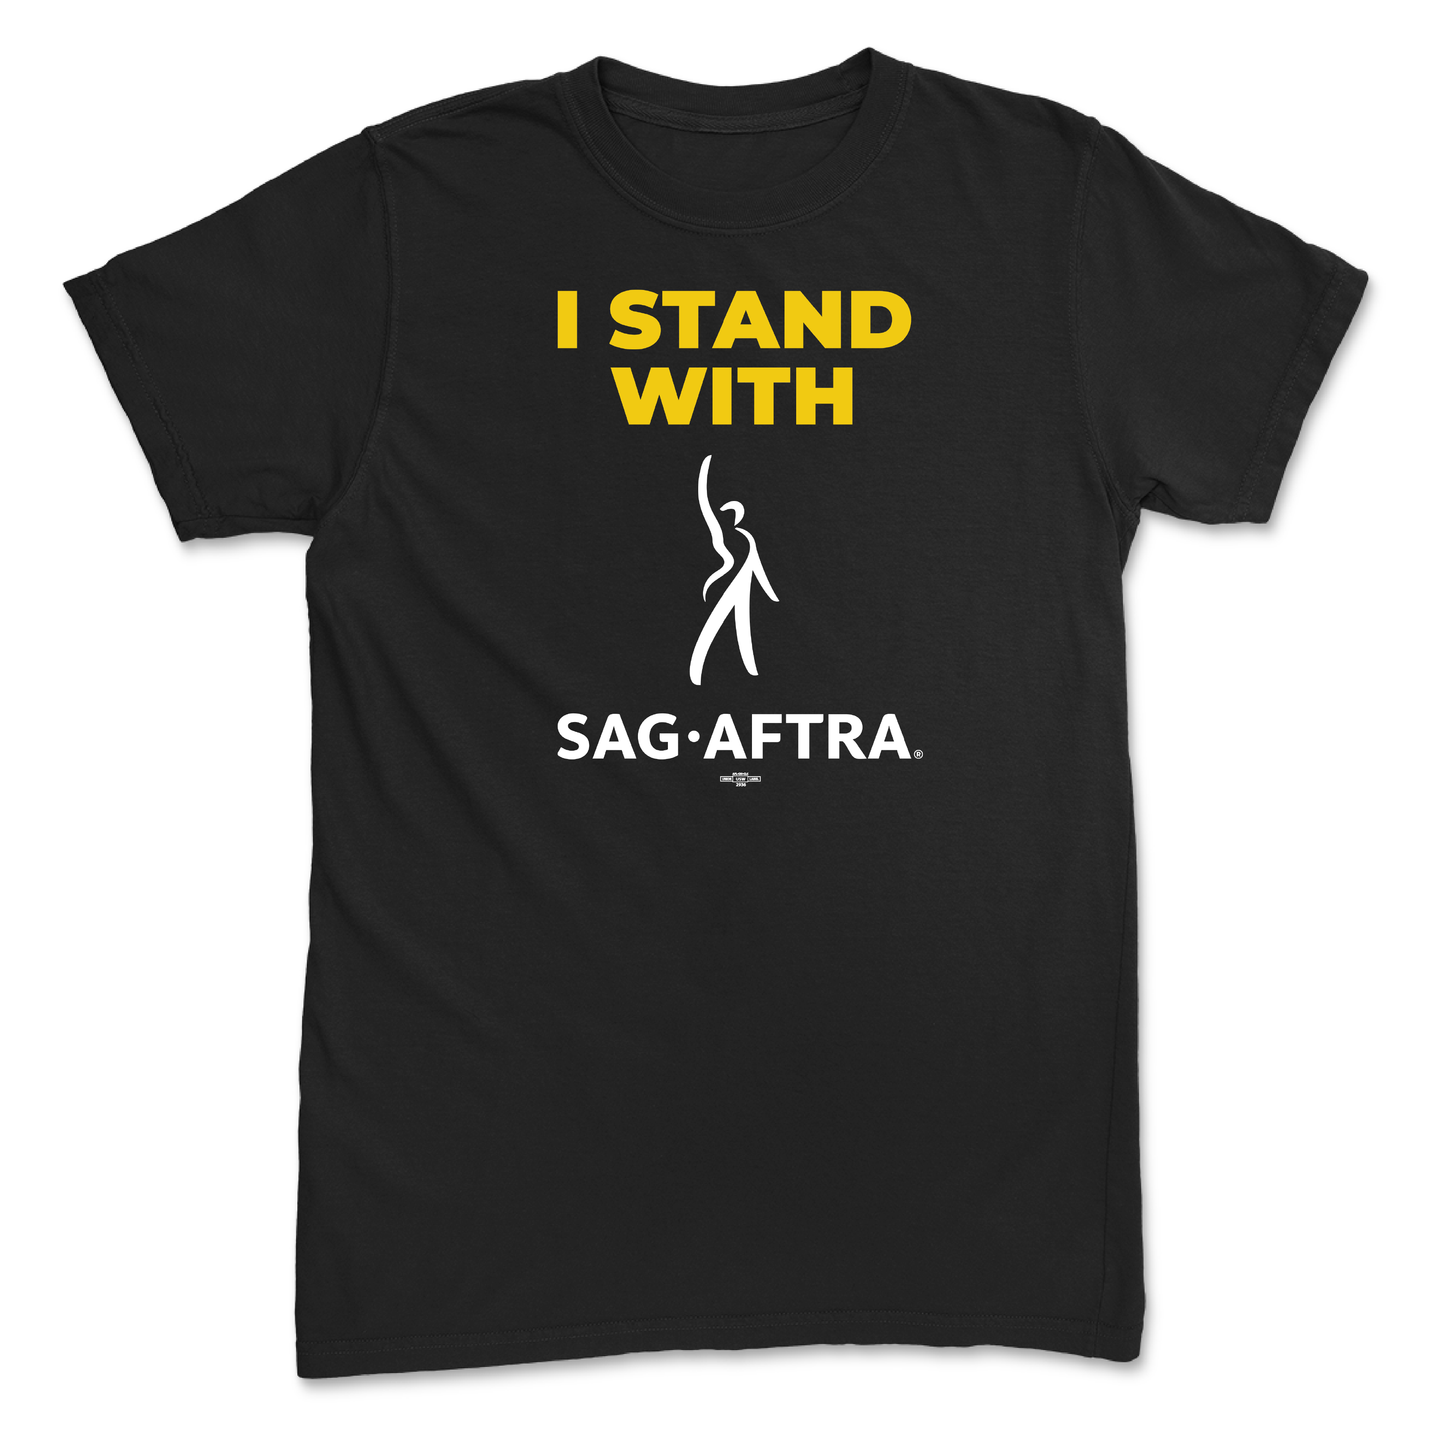 I Stand With SAG-AFTRA